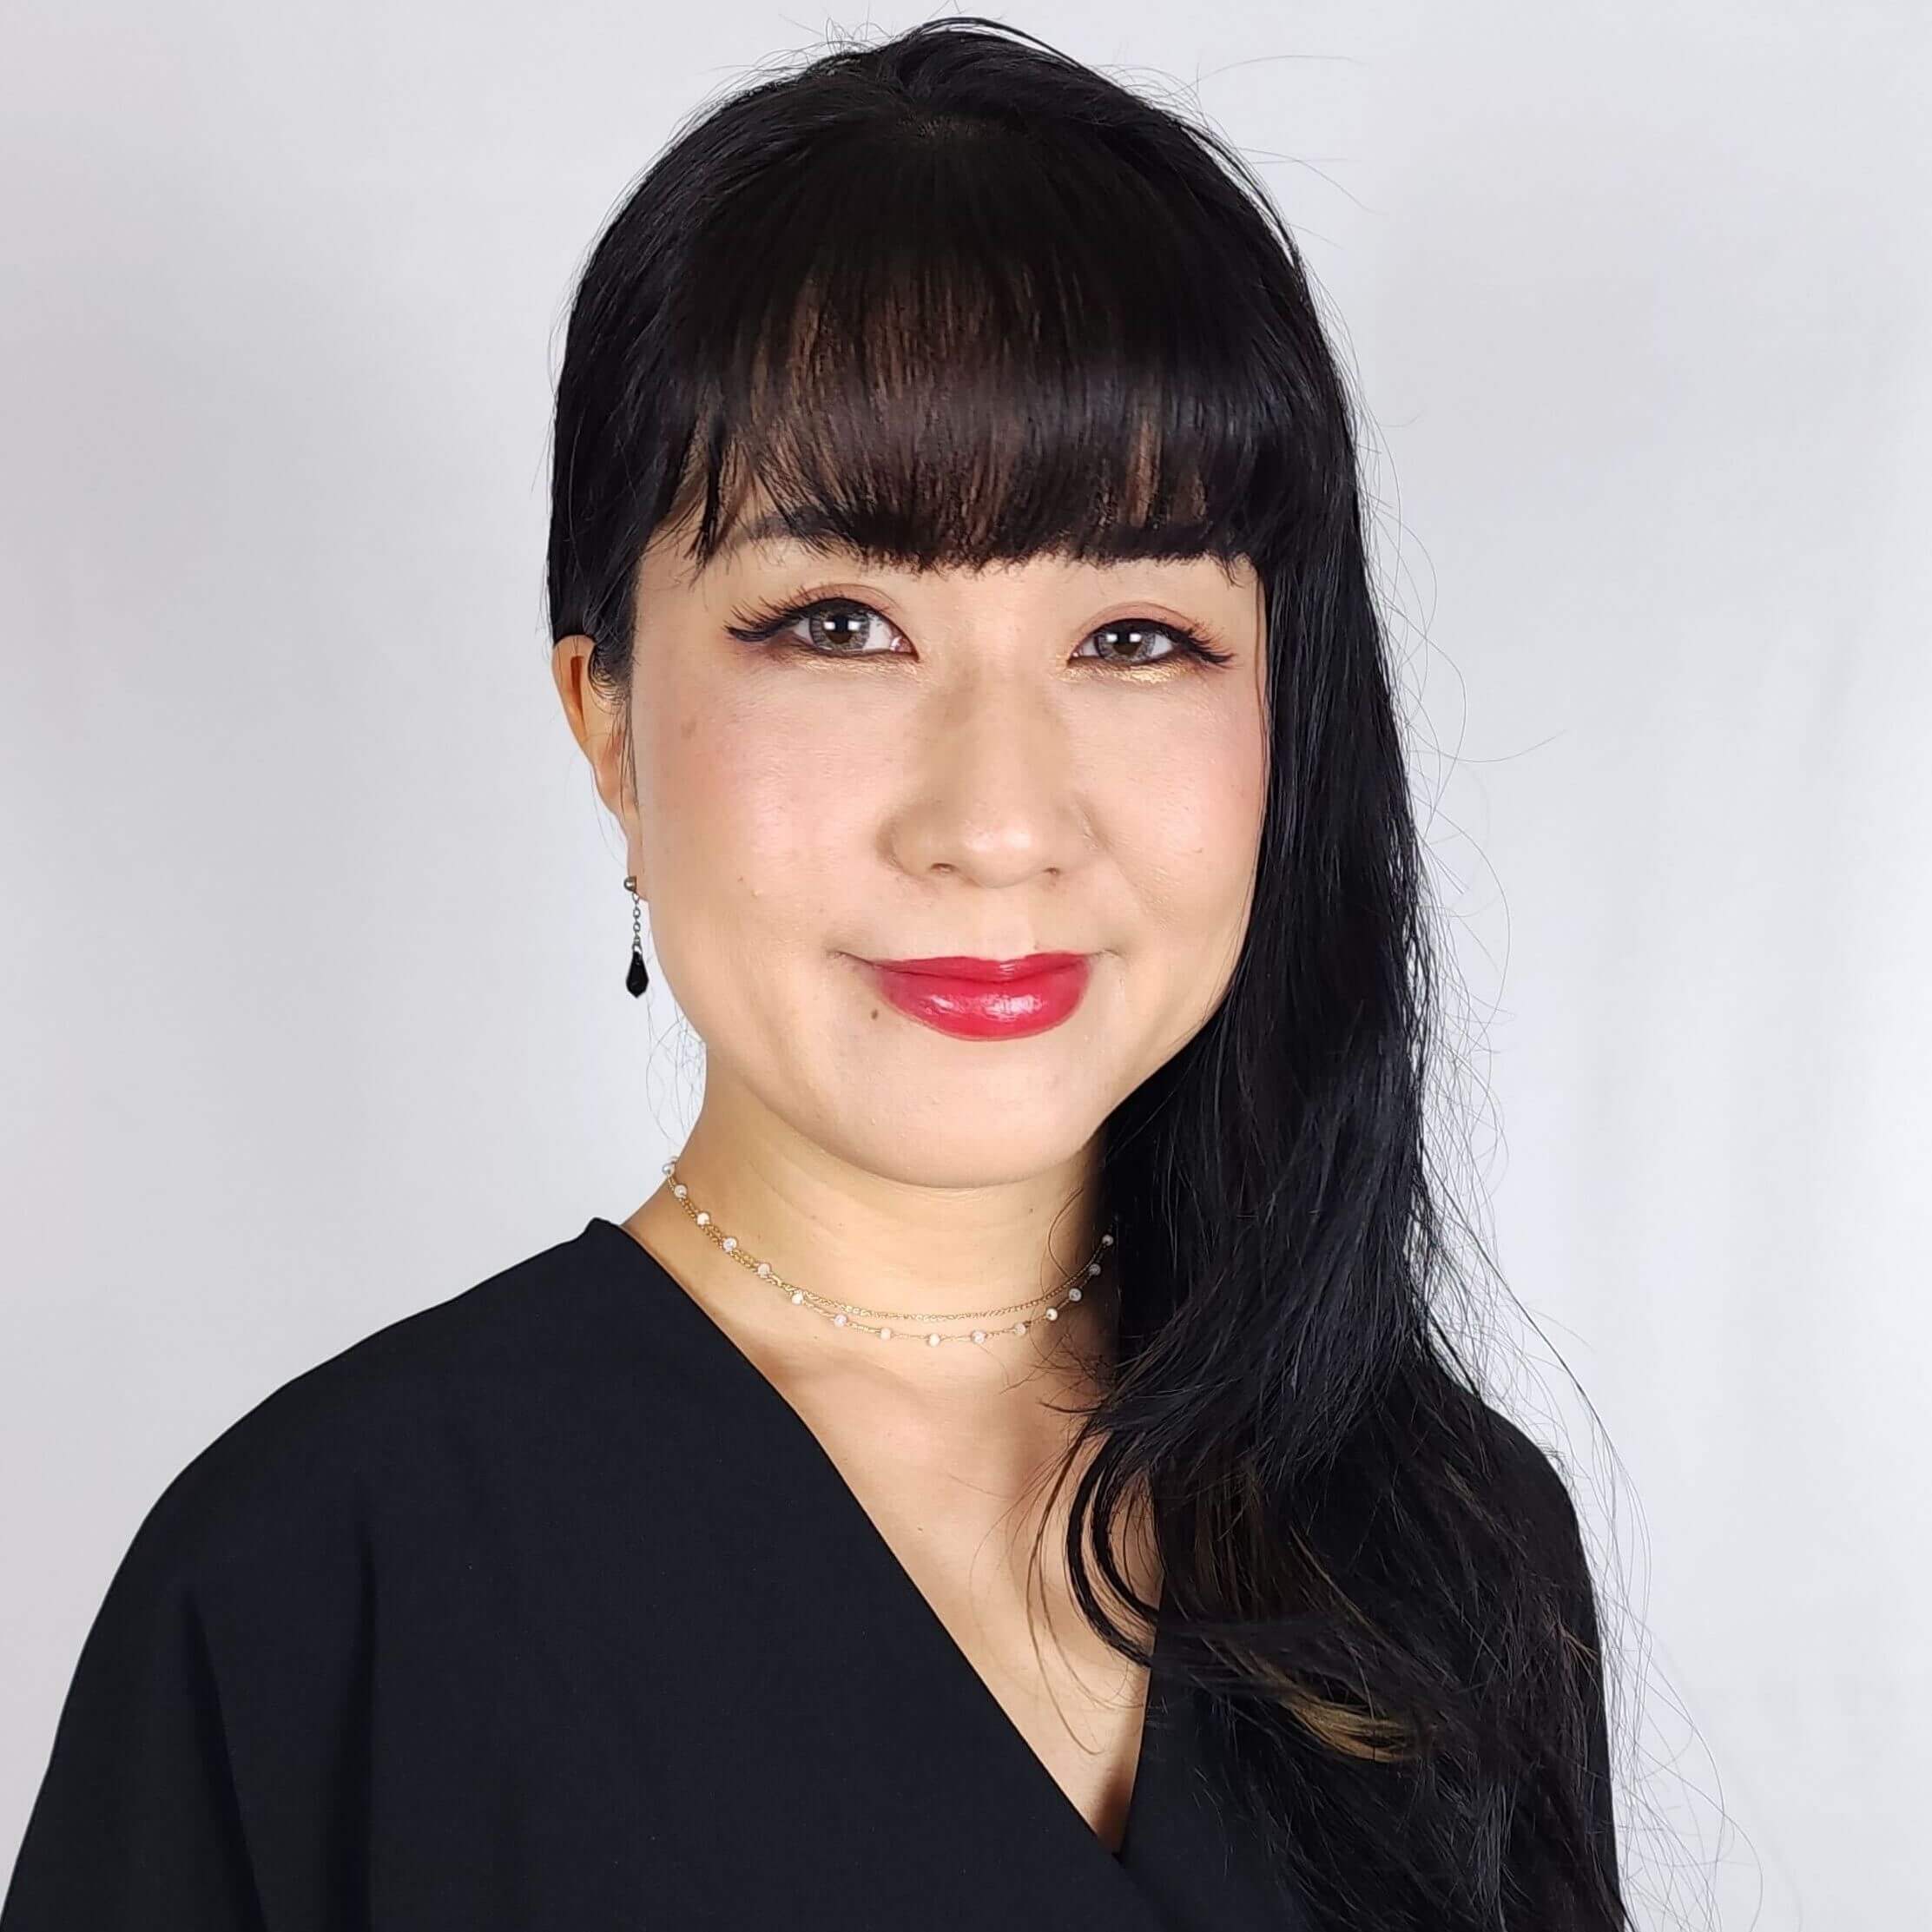 Anime Casting Director Mami Okada. Asian woman wearing a black top with black hair laying on her left shoulder, smiling wearing red lipstick.